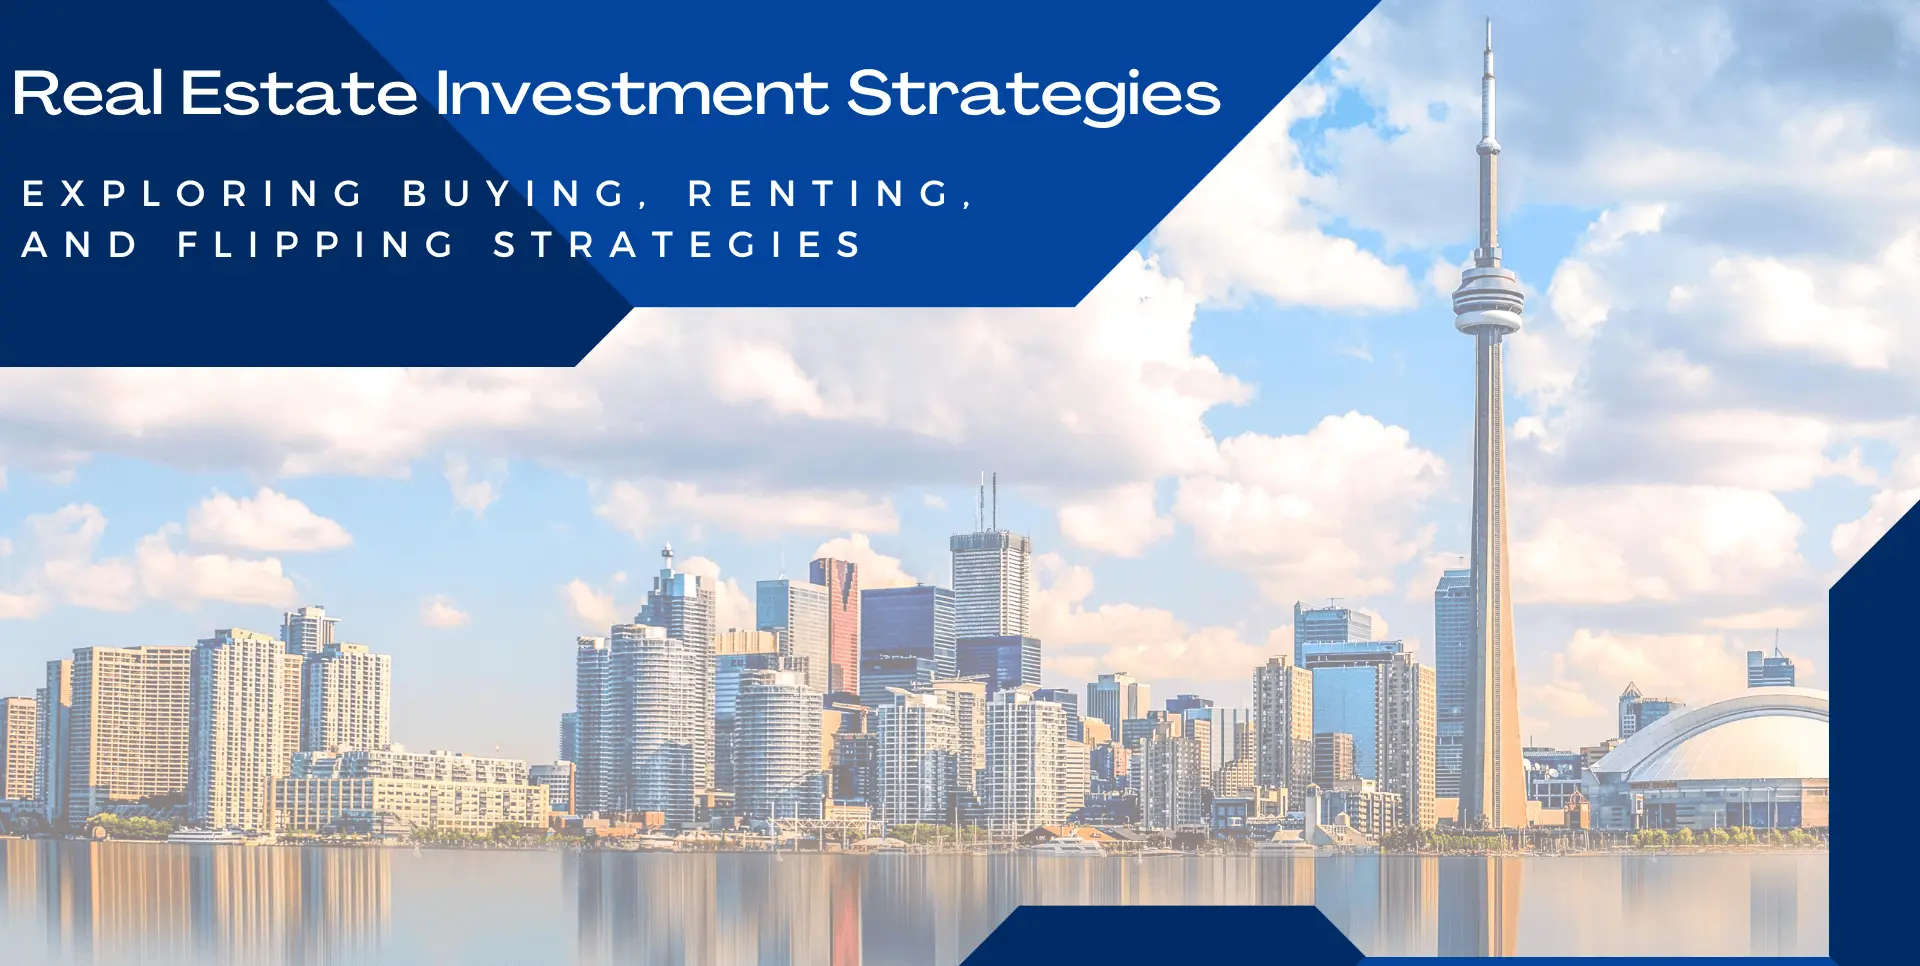 Real Estate Investment Strategies Exploring Buying, Renting, and Flipping Strategies